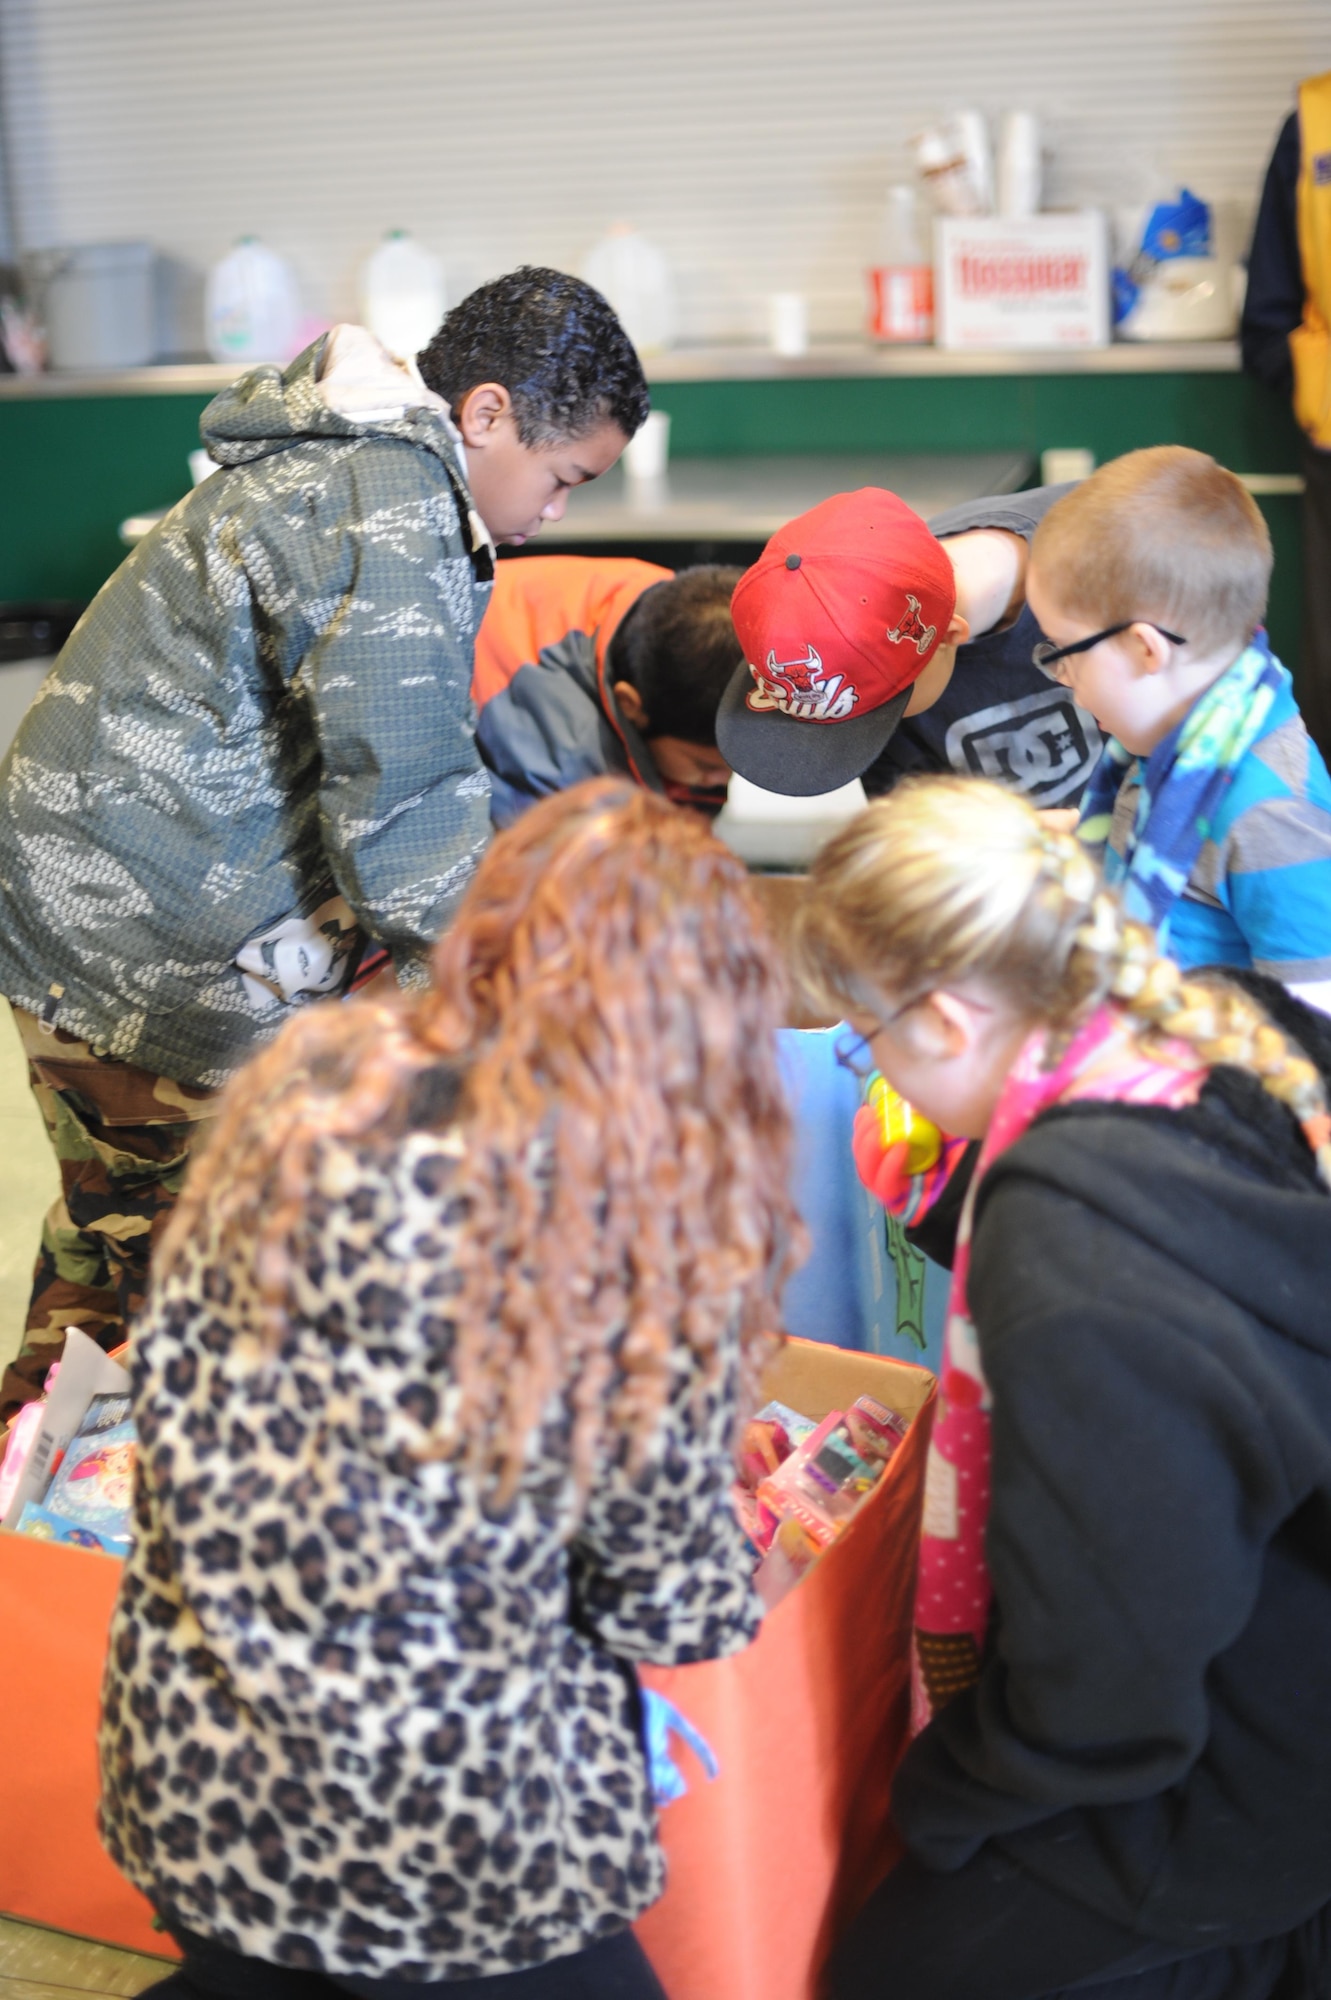 Children pick toys from a bin Dec. 20, 2016, at Cedar Lane Elementary School in Olivehurst, California. Hundreds of toys were donated to the Marysville Joint Unified School District’s homeless students and their families. (U.S. Air Force photo by Senior Airman Tara R. Abrahams)